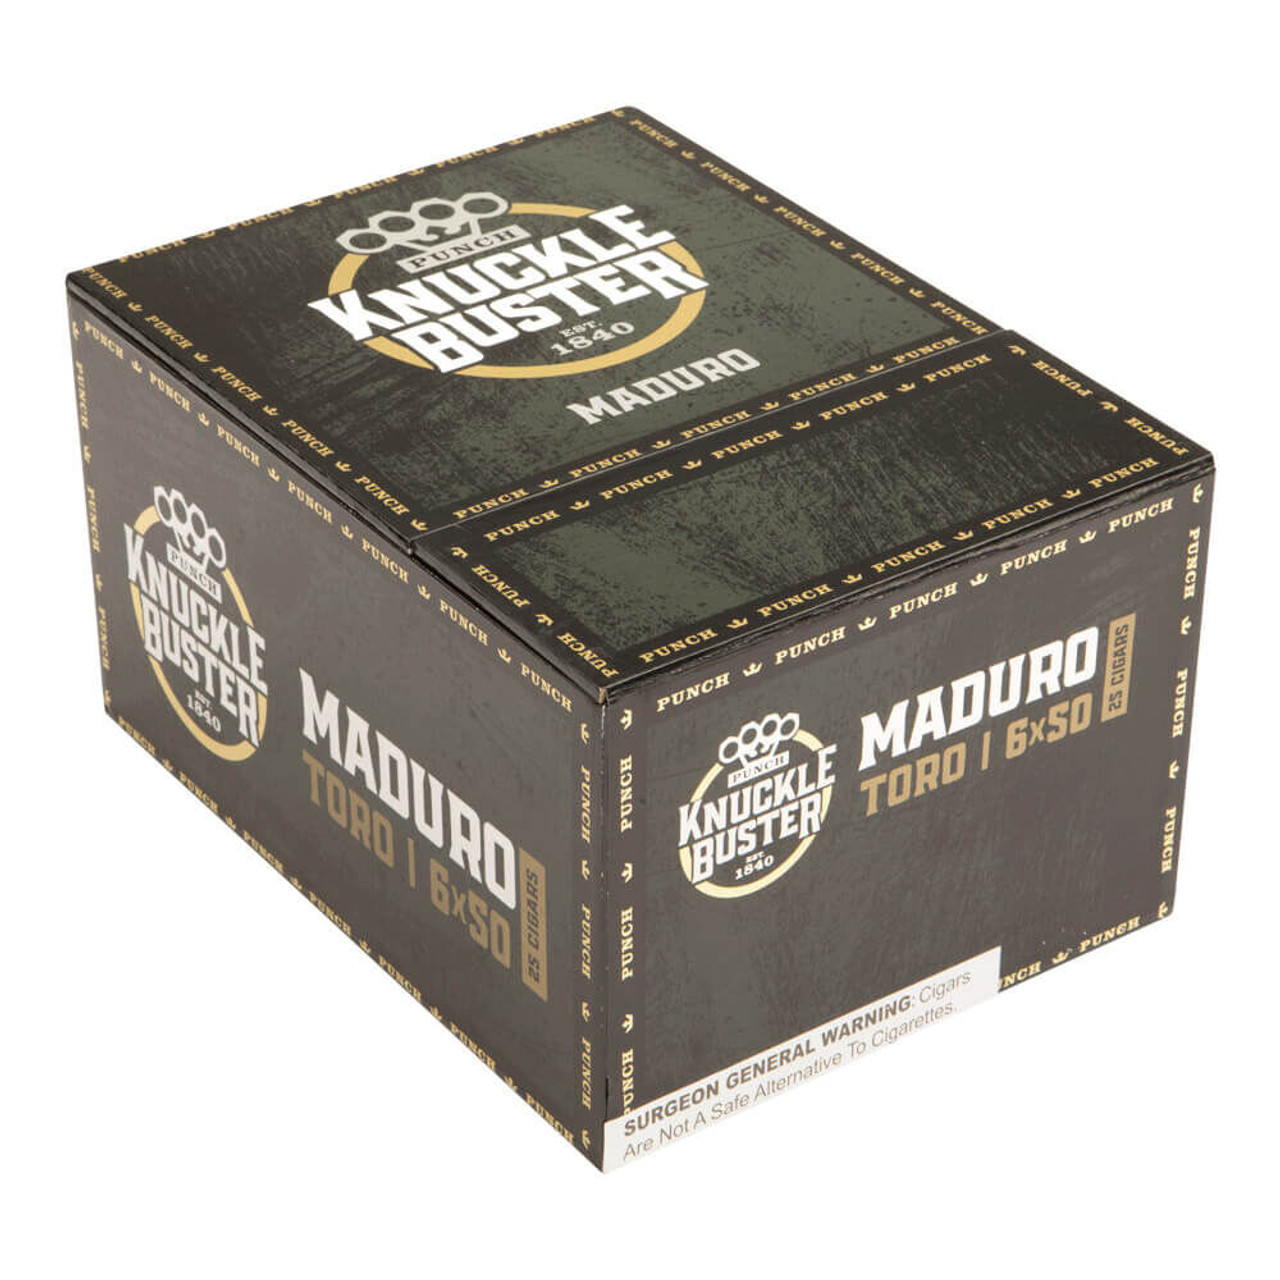 Punch Knuckle Buster Toro Maduro Cigars - 6 x 50 (Box of 25) *Box